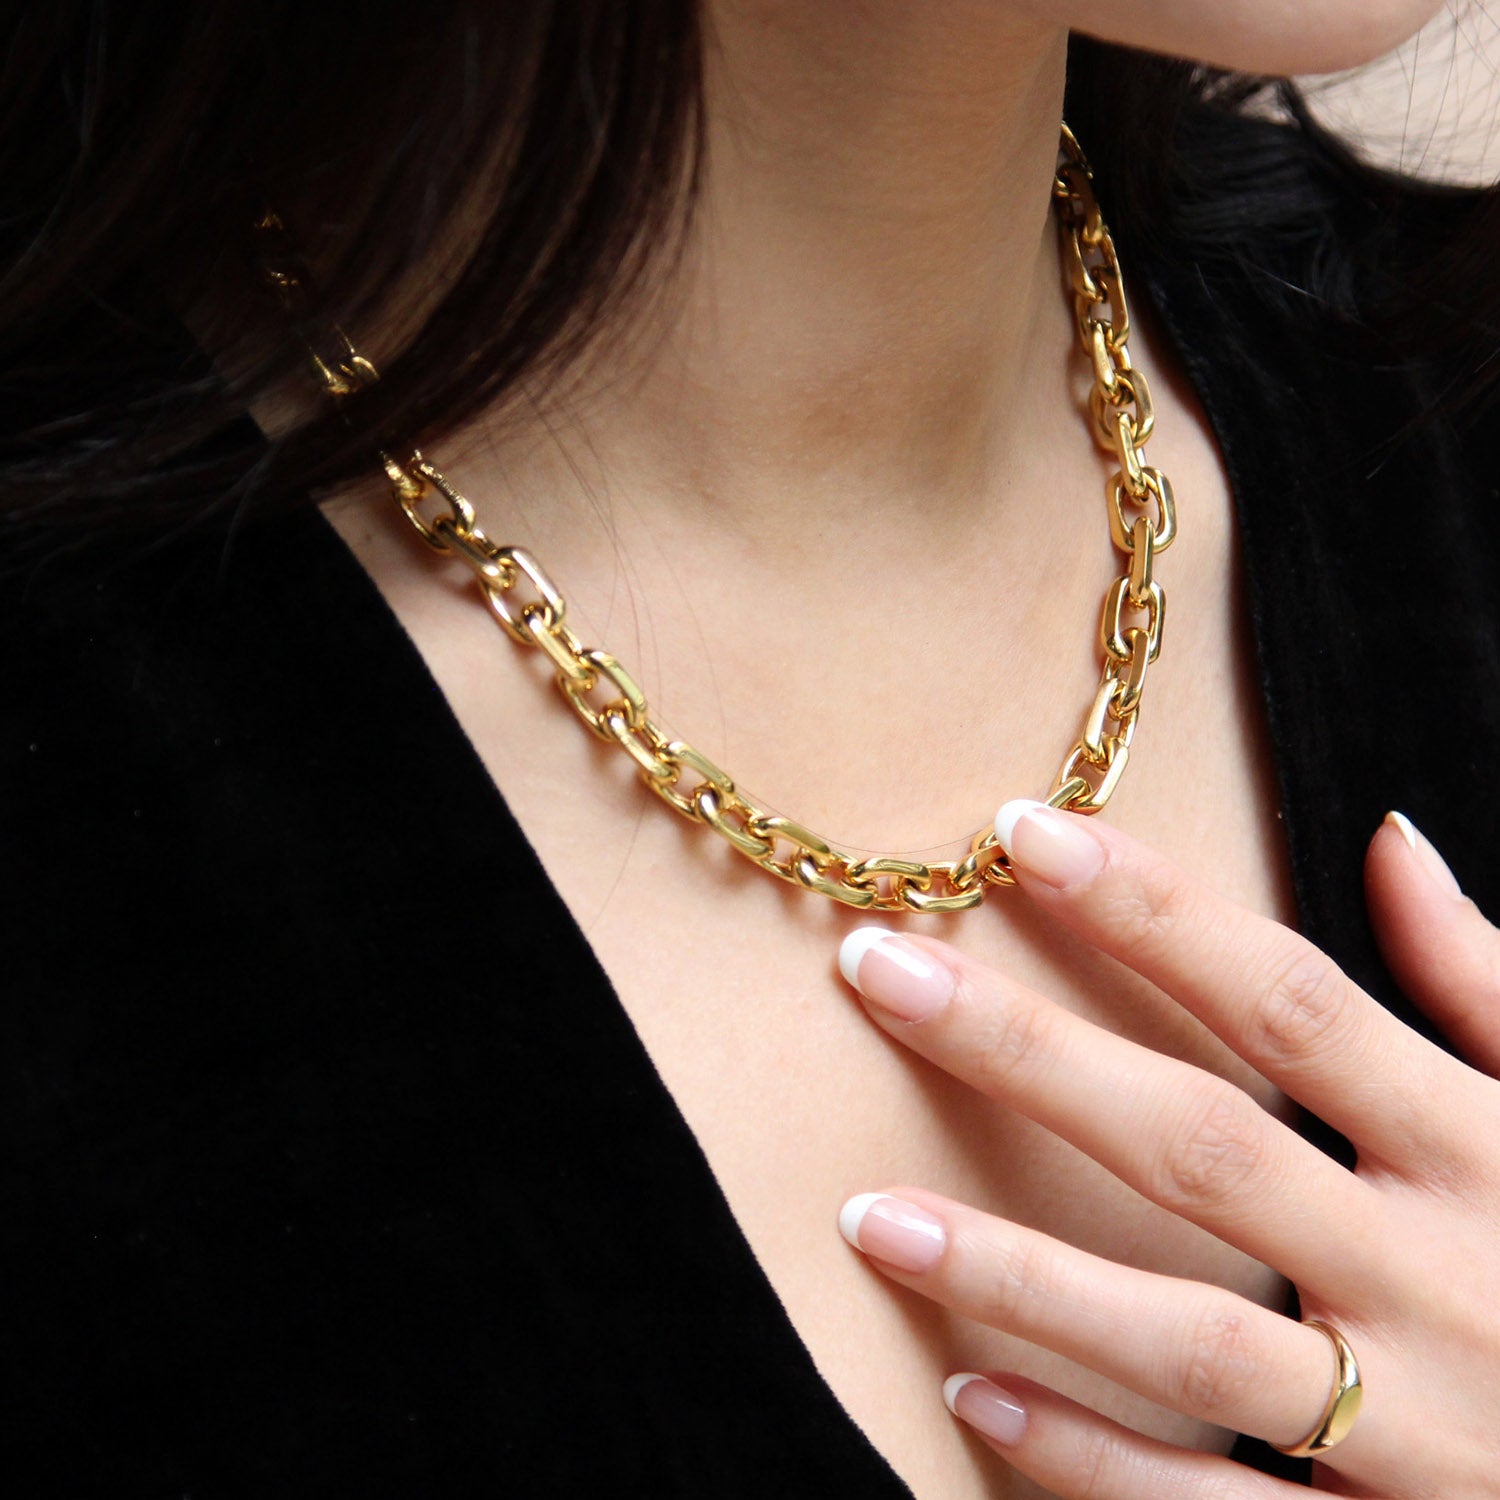 Discover the SHAYE Trace Chain Necklace at Gosia Orlowska